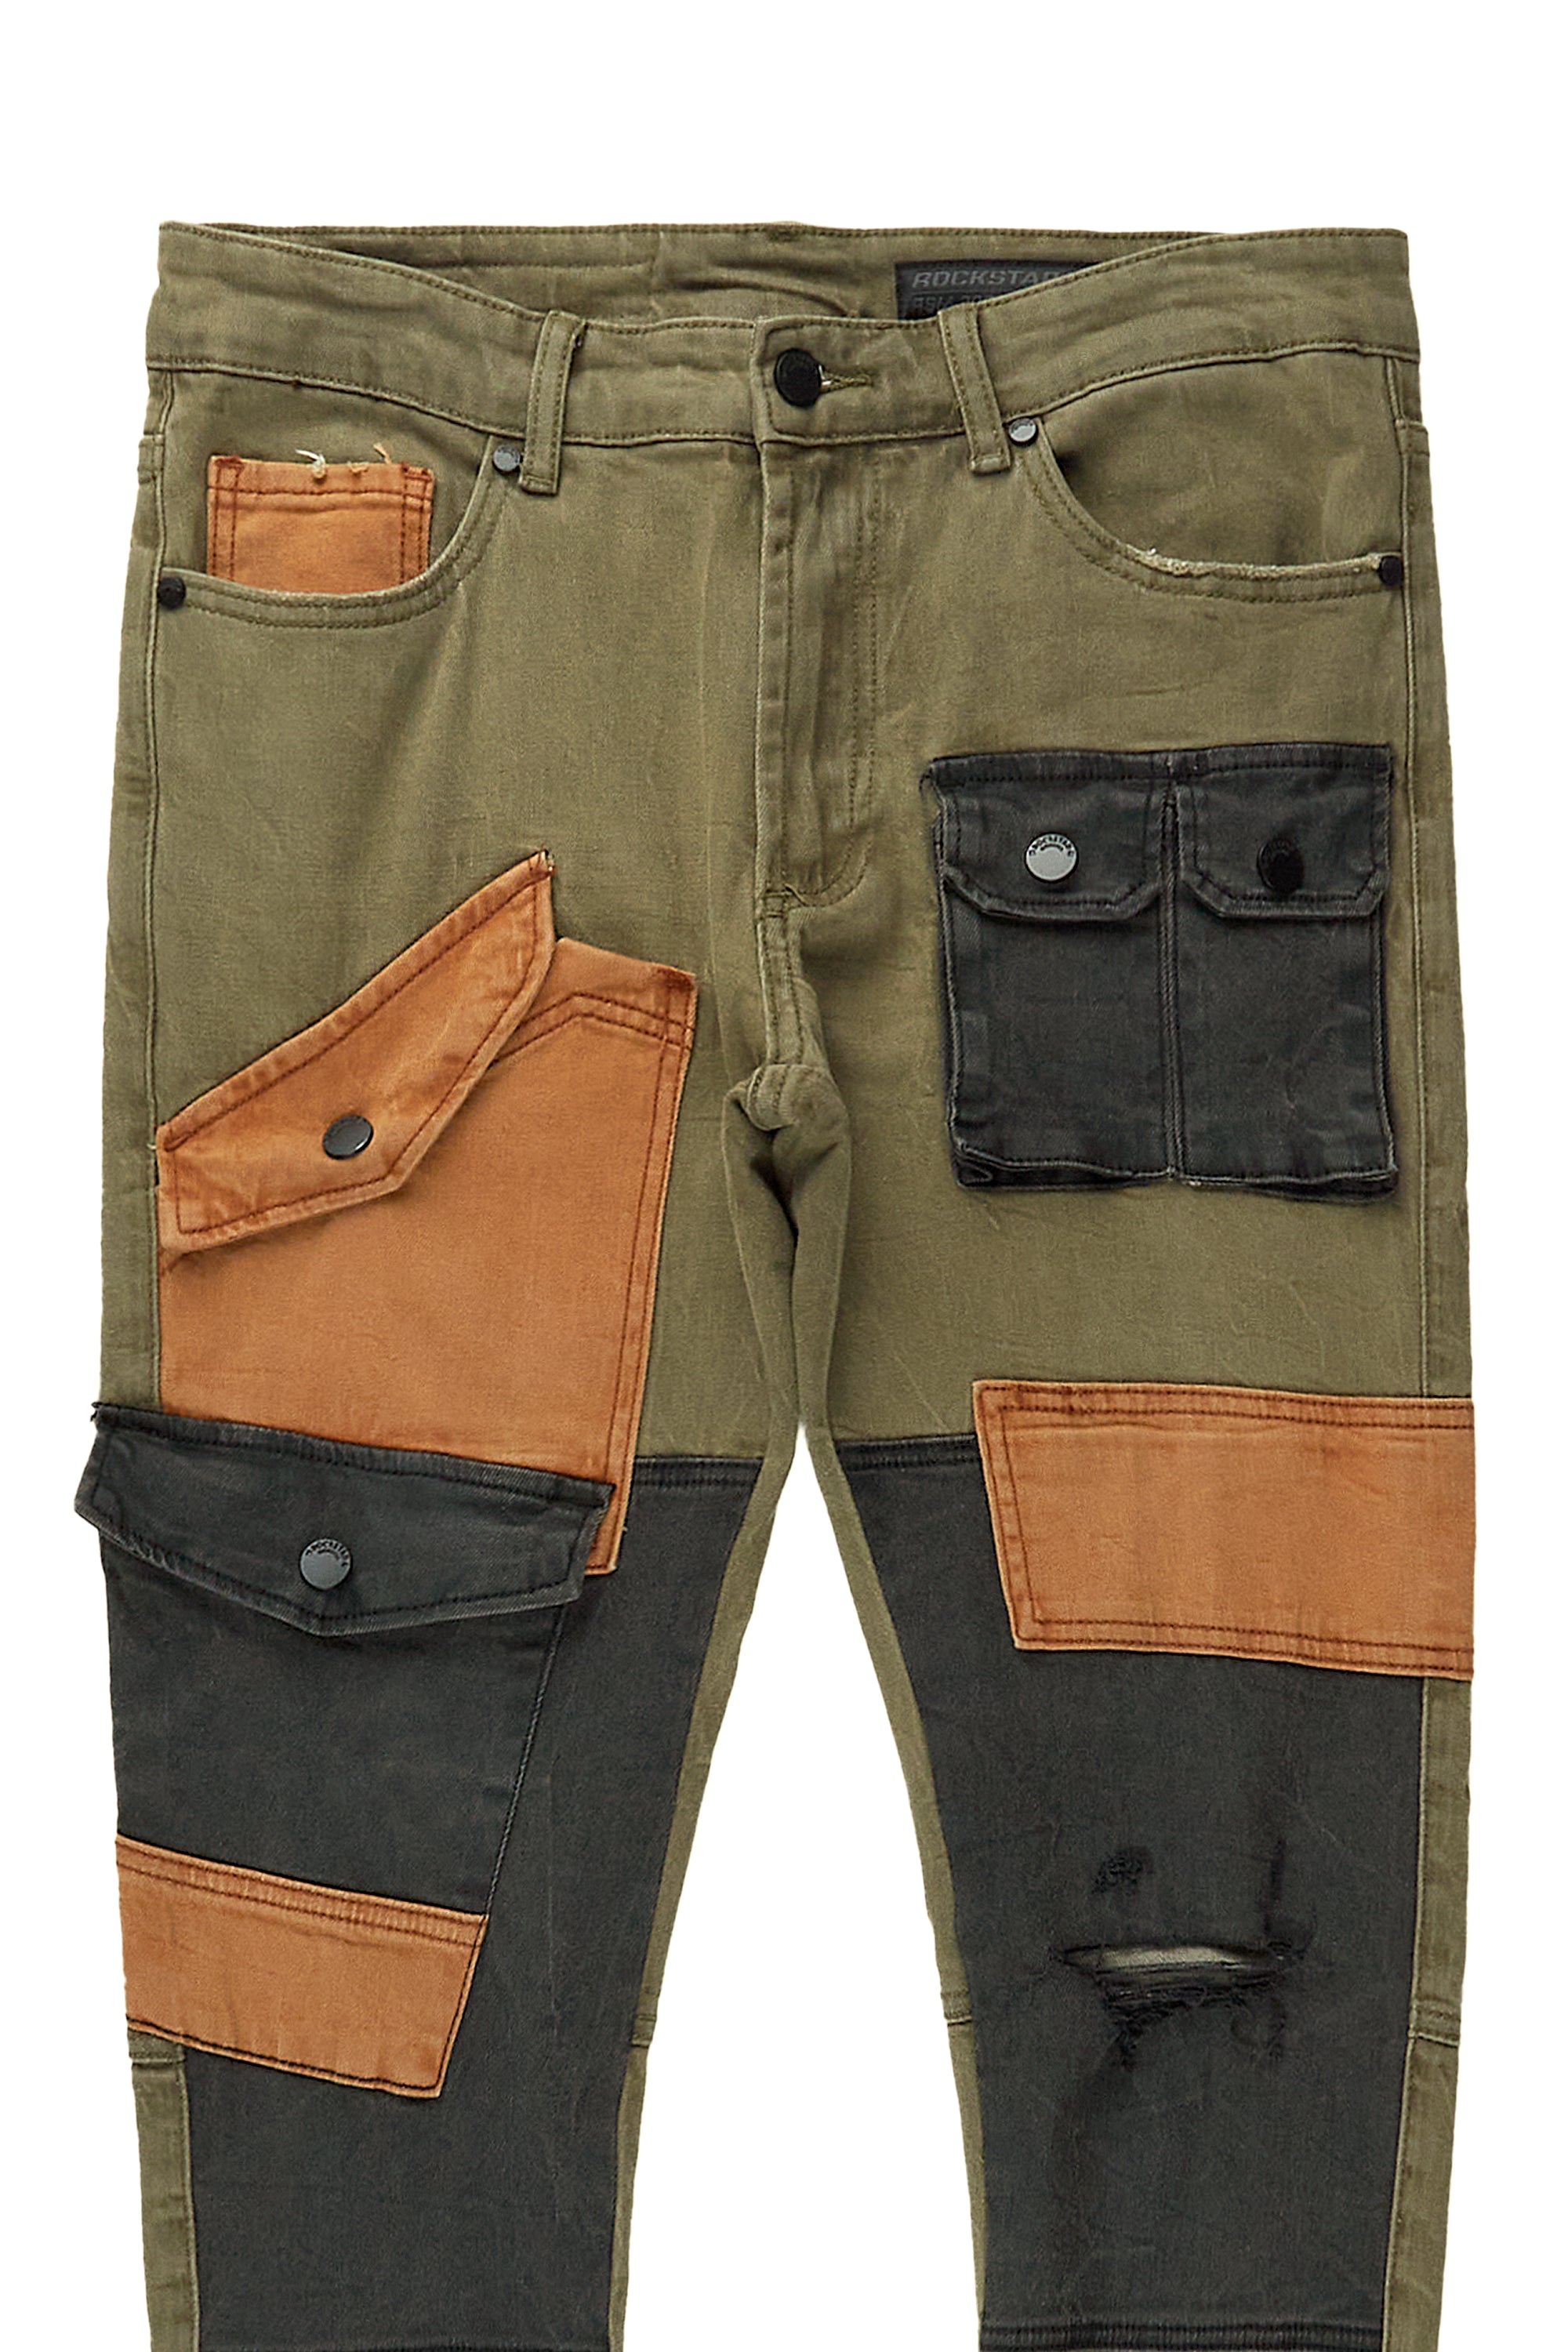 Demarcus Olive Patch Jean